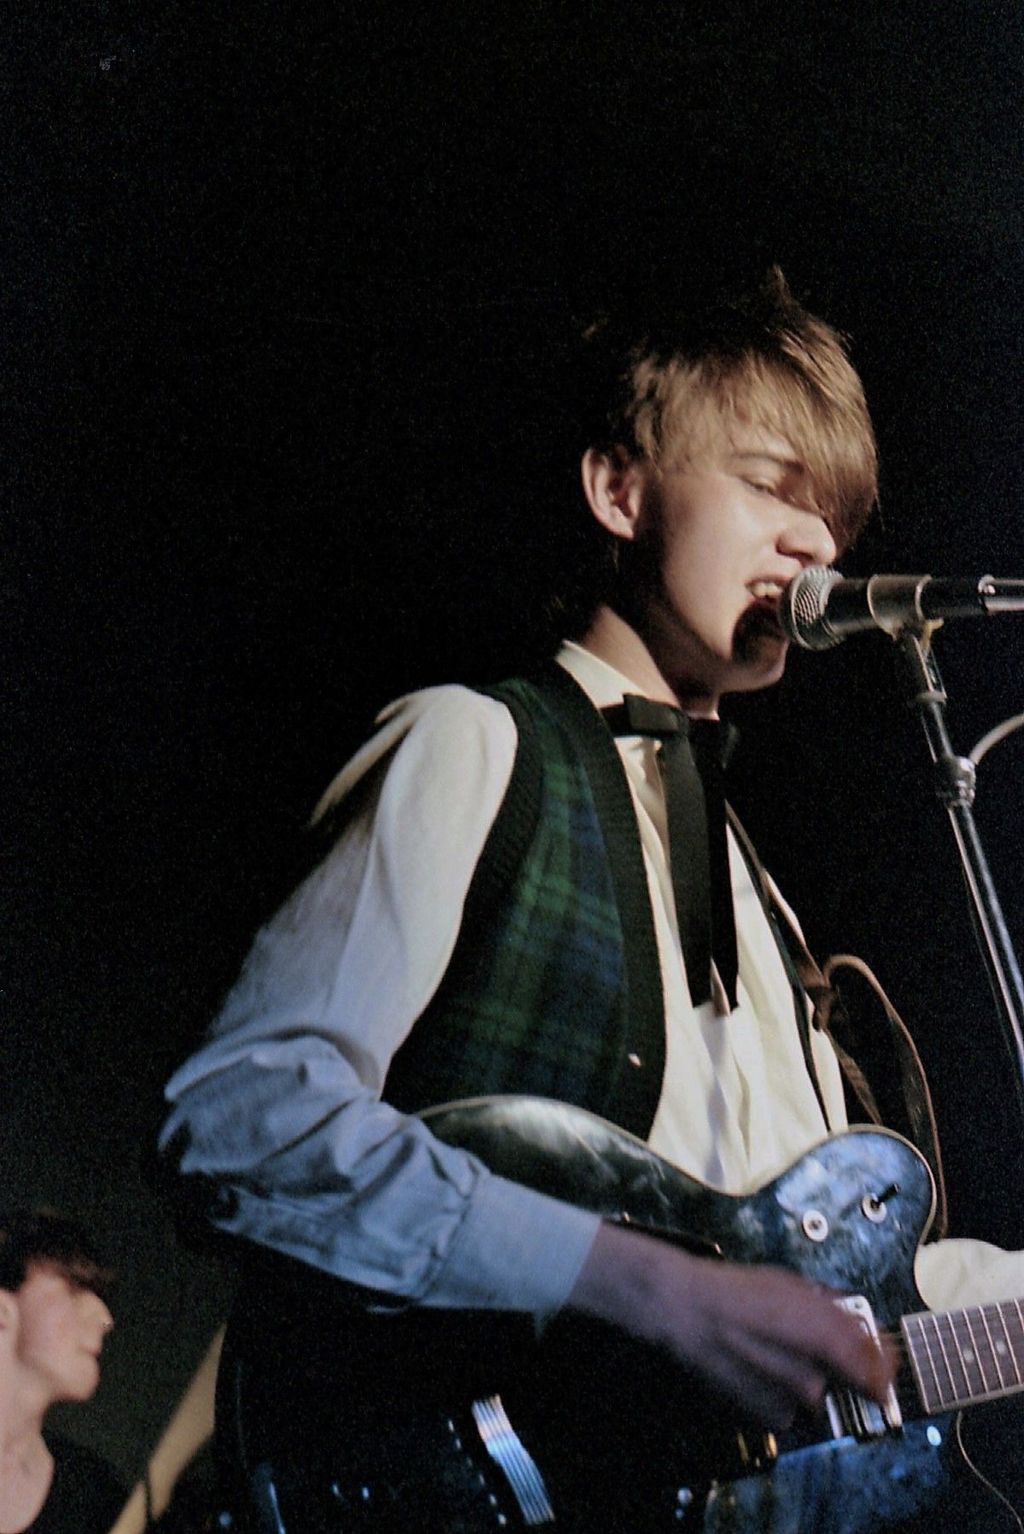 This performance of Orange Juice at the Bungalow Bar in Paisley also features in the book